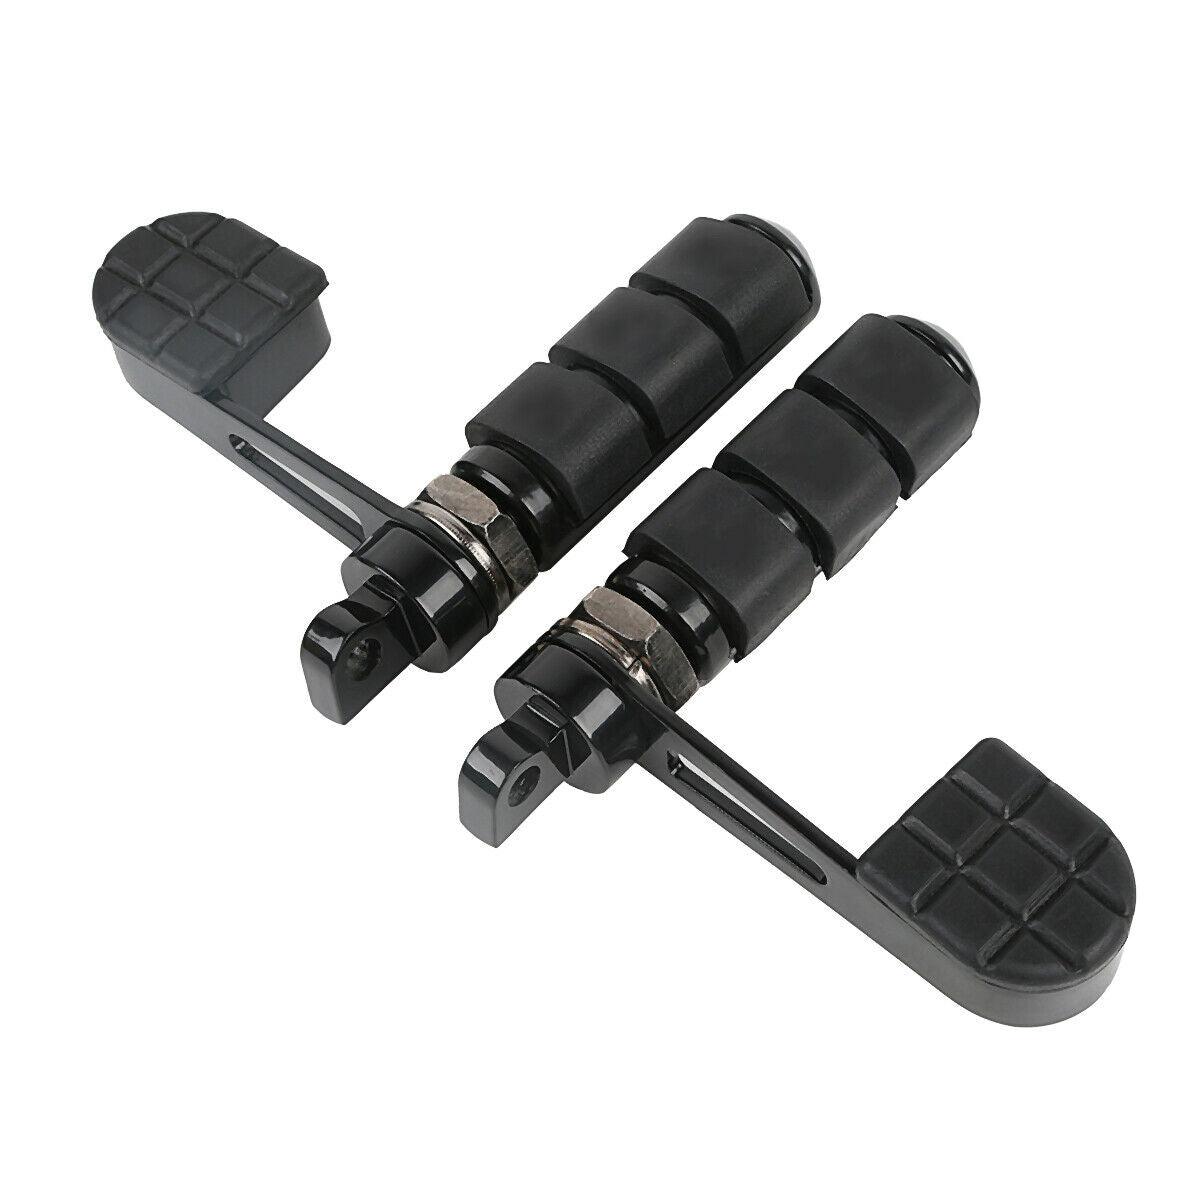 Anti Vibration Stirrup Heel Foot FootPegs Fit For Harley Softail Sportster Black - Moto Life Products